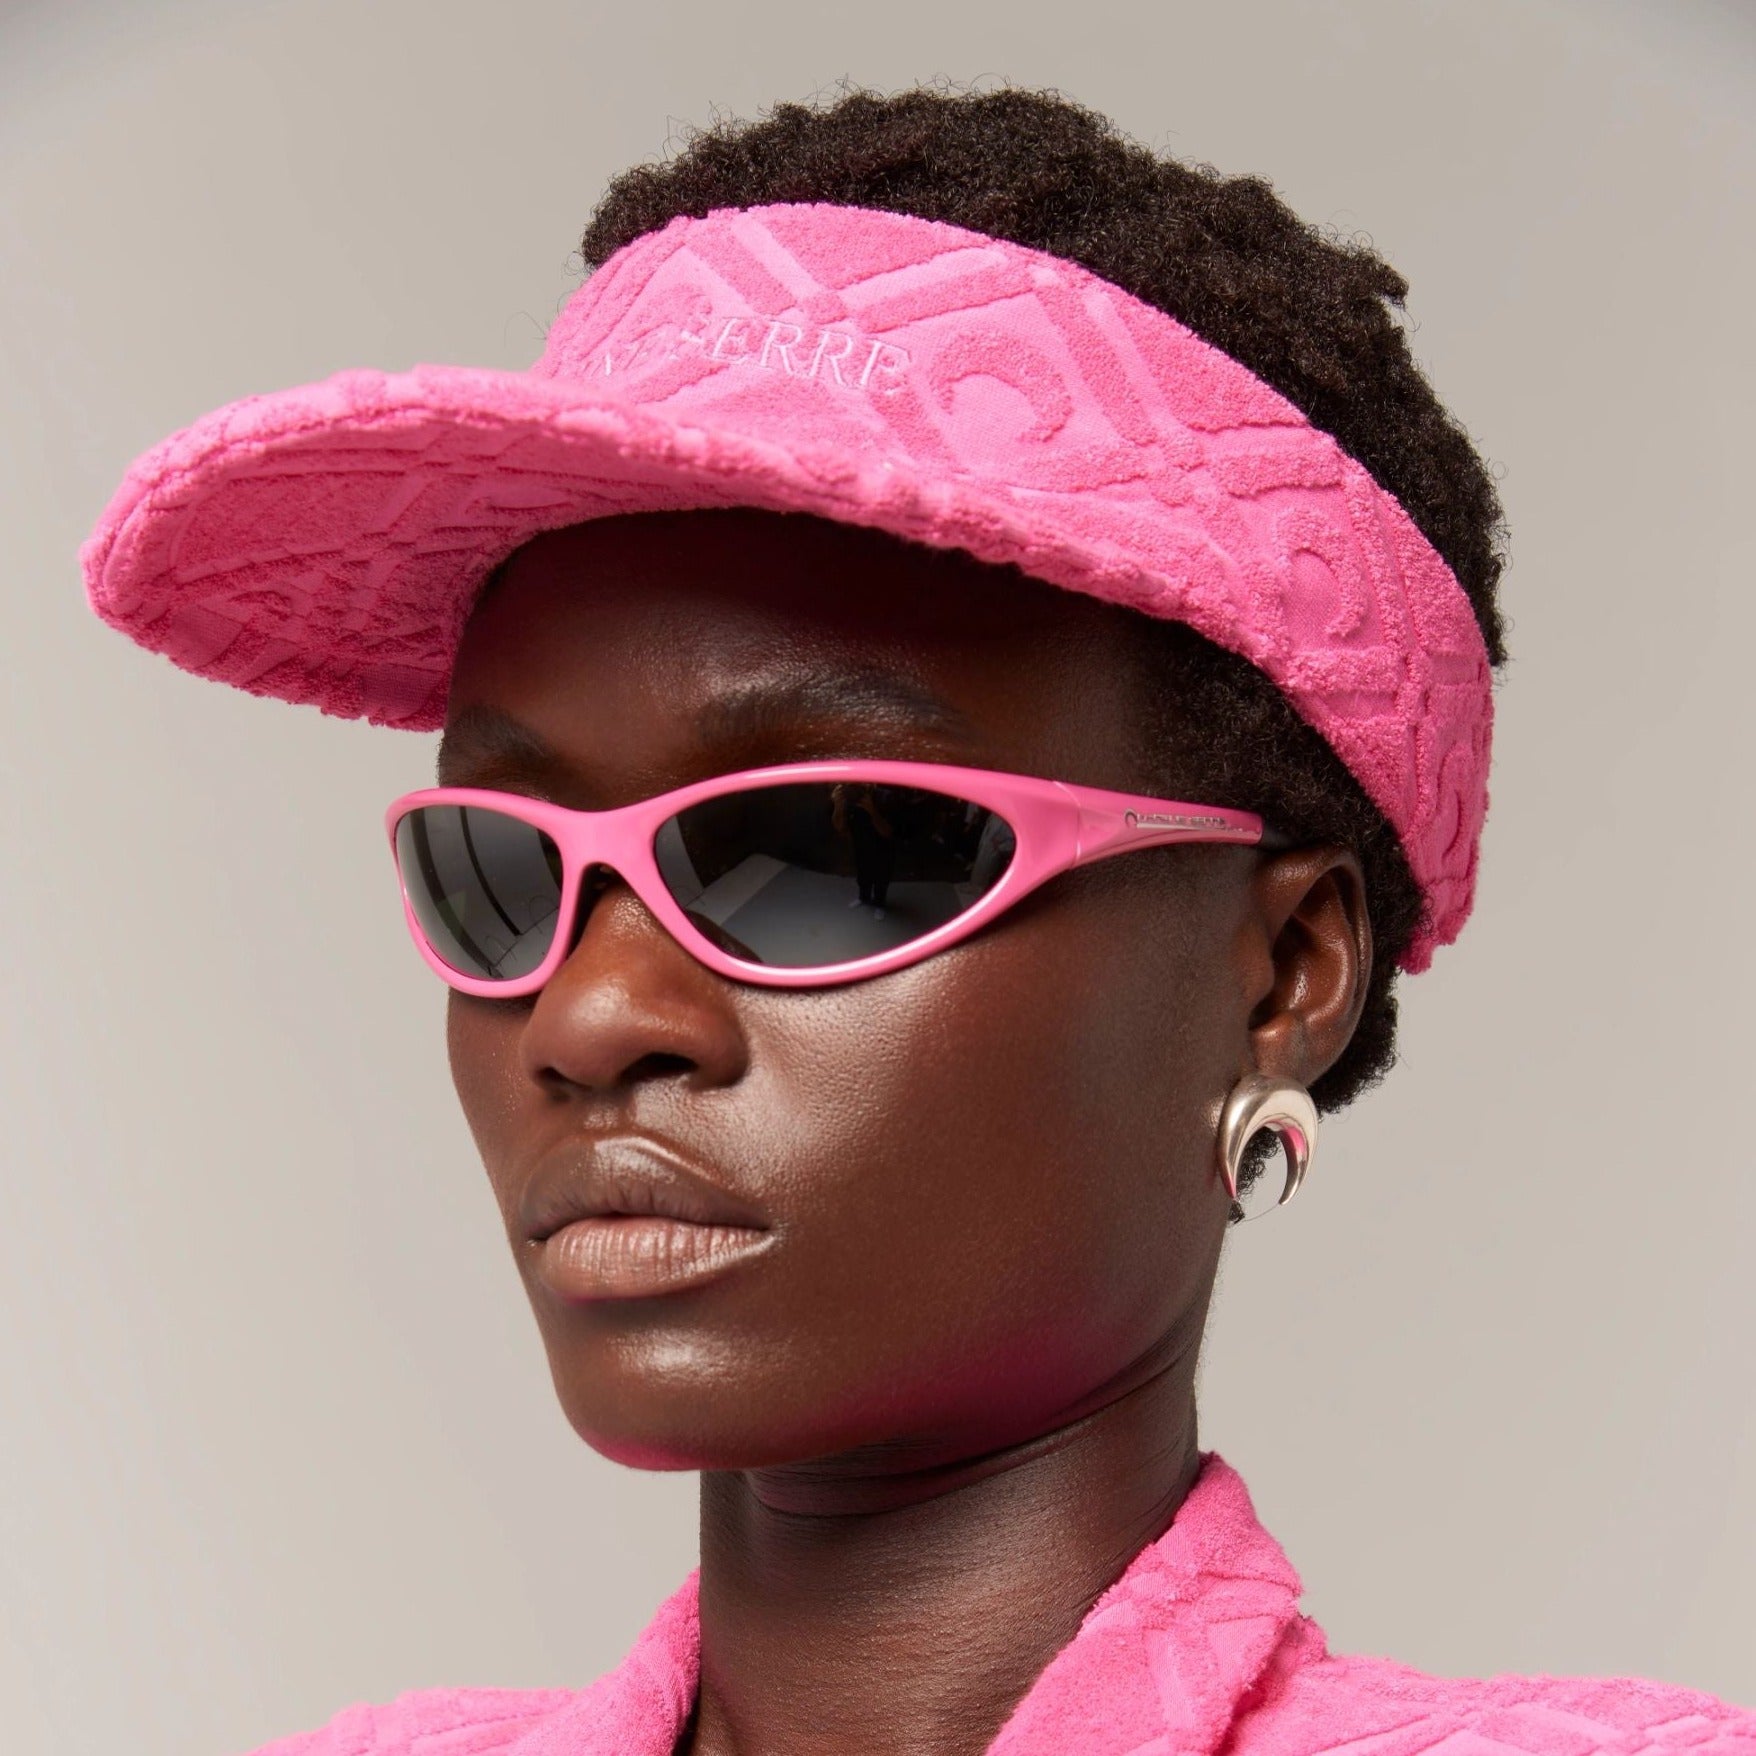 Photo of model wearing the MS x Vaurnet Injected Visionizer Glasses - Pink.